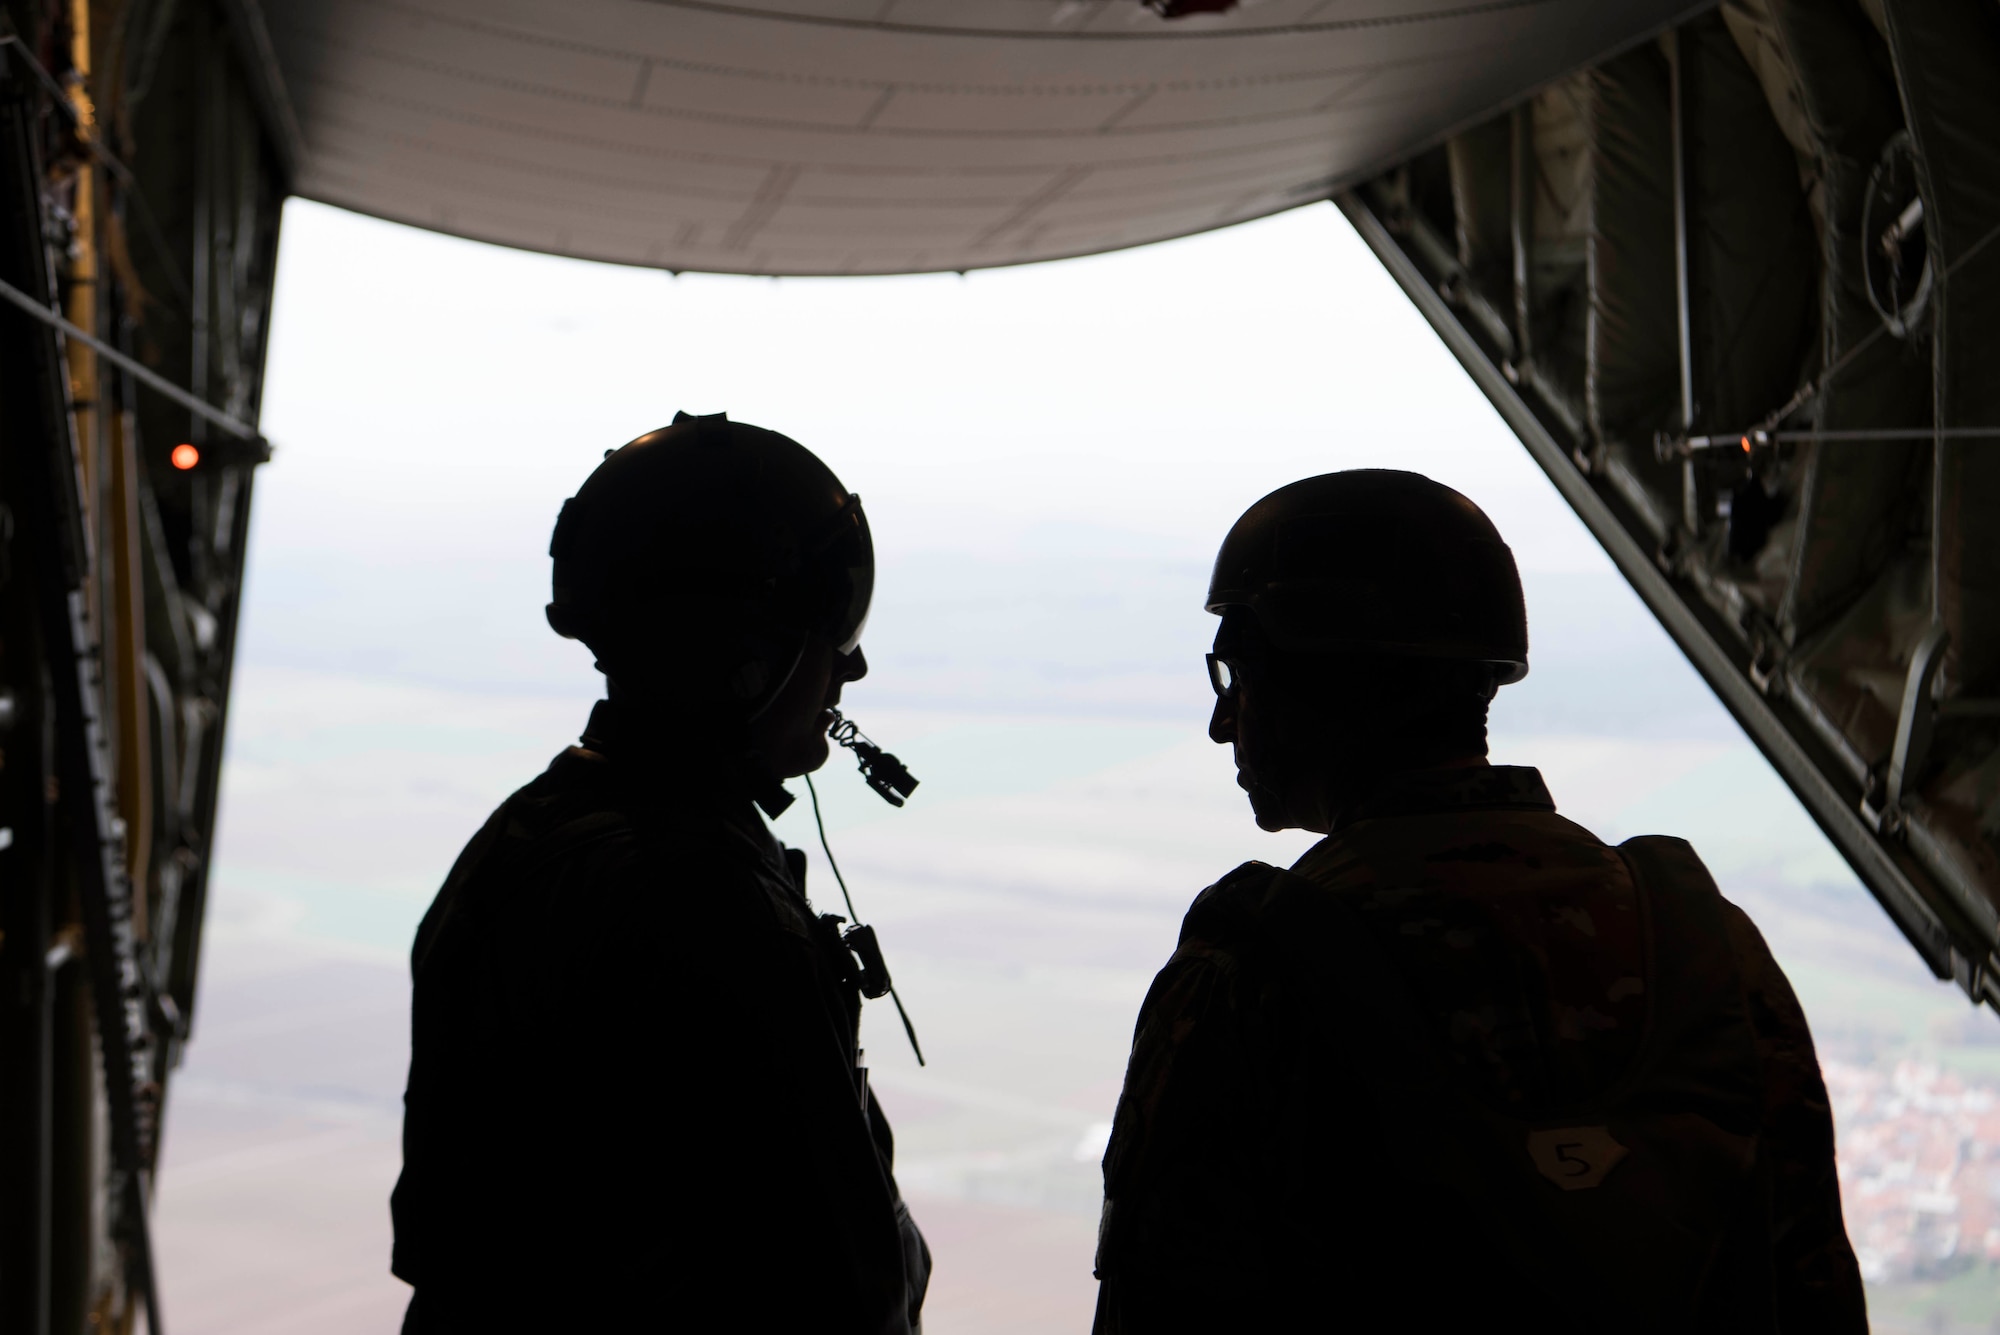 U.S. Air Force Master Sgt. Cecil Johnson, 37th Airlift Squadron C-130J Super Hercules loadmaster, speaks with a U.S. Army jumpmaster in a U.S. Air Force C-130J over Alzey Drop Zone, Germany Dec. 6, 2017. Paratroopers with the U.S. Air Force, U.S. Army, German, Italian, Dutch, British, and Estonian militaries participated in Operation Toy Drop 2017 to maintain their military free fall and jumpmaster proficiencies. (U.S. Air Force photo by Senior Airman Devin M. Rumbaugh)